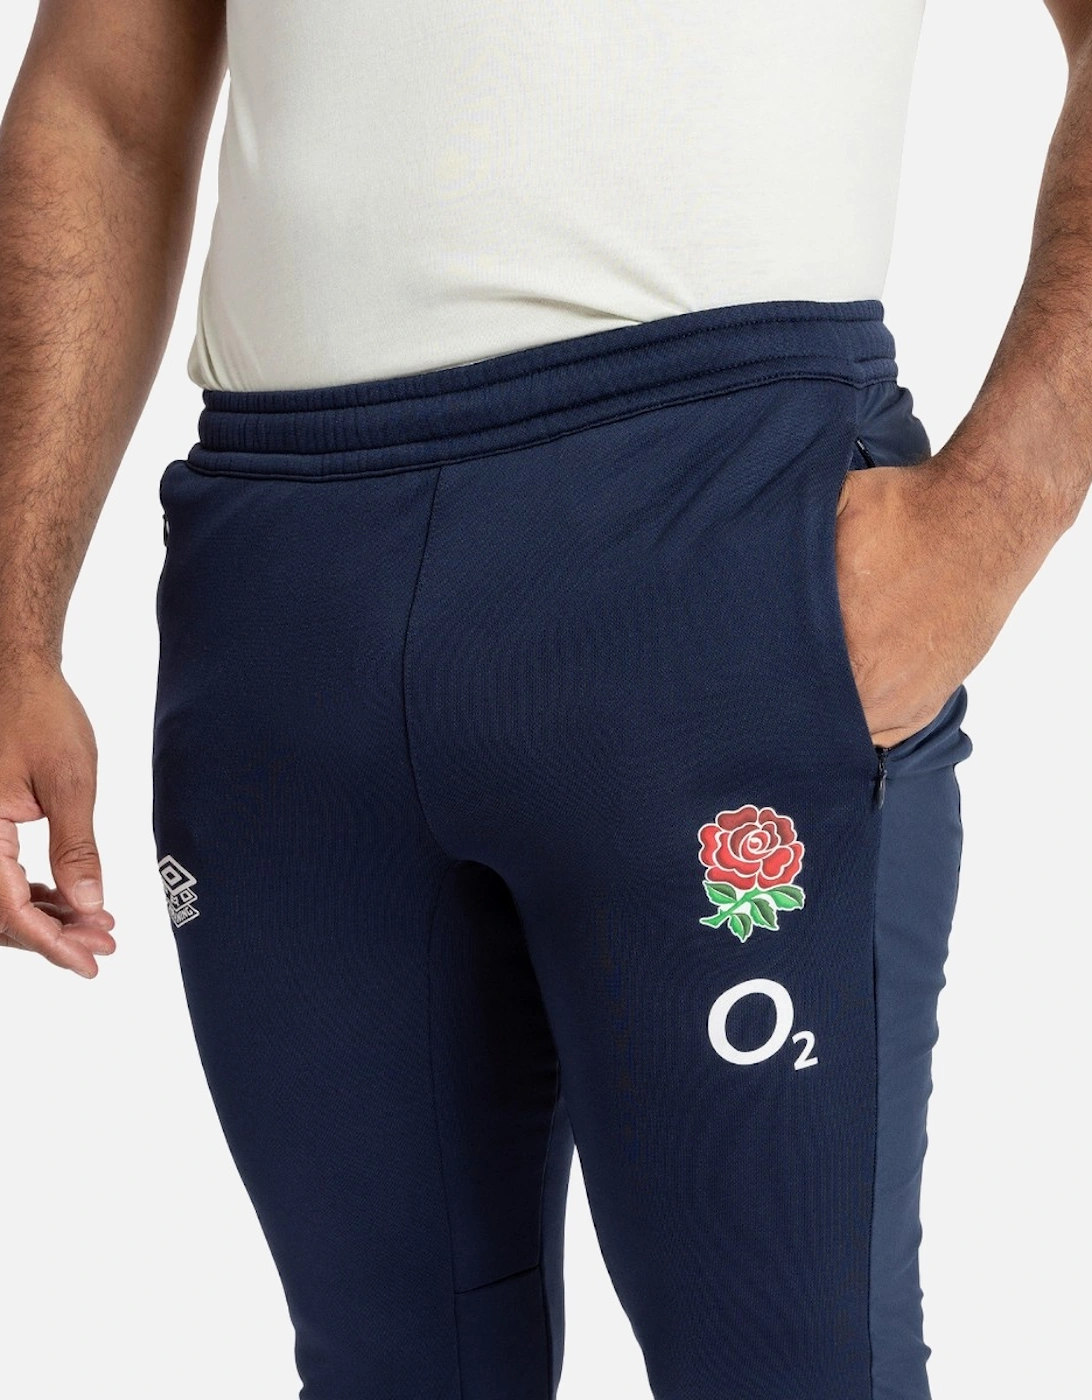 Mens 23/24 Drill England Rugby Contact Pants